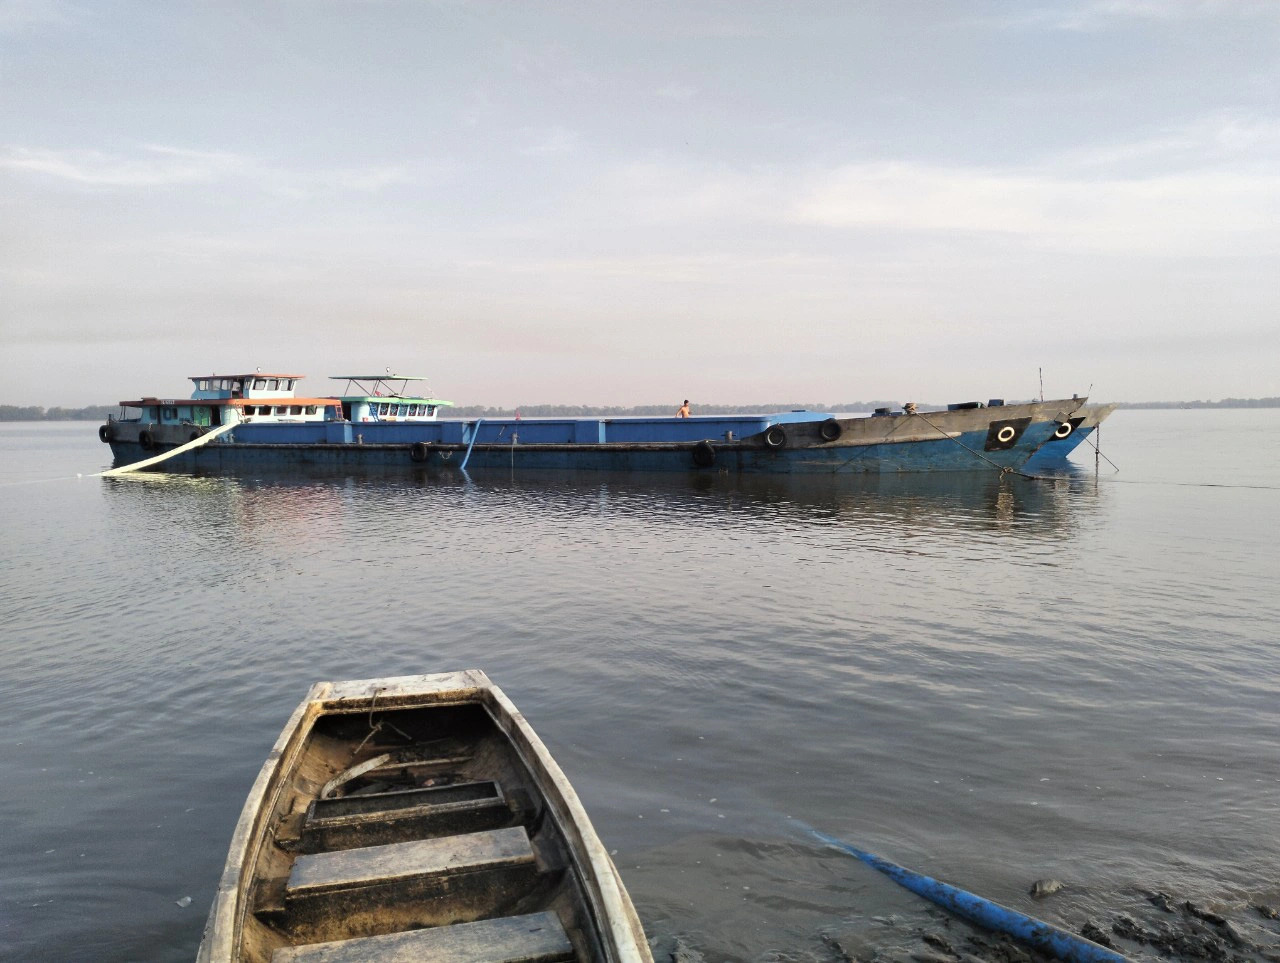 One of the barges operated by Dai Phuoc Thanh Construction and Trading Company, located in Tien Giang Province, southern Vietnam, transports fresh water to the province’s Go Cong Dong District which is facing a shortfall of fresh water due to saline intrusion and prolonged drought. Photo: Mau Truong / Tuoi Tre